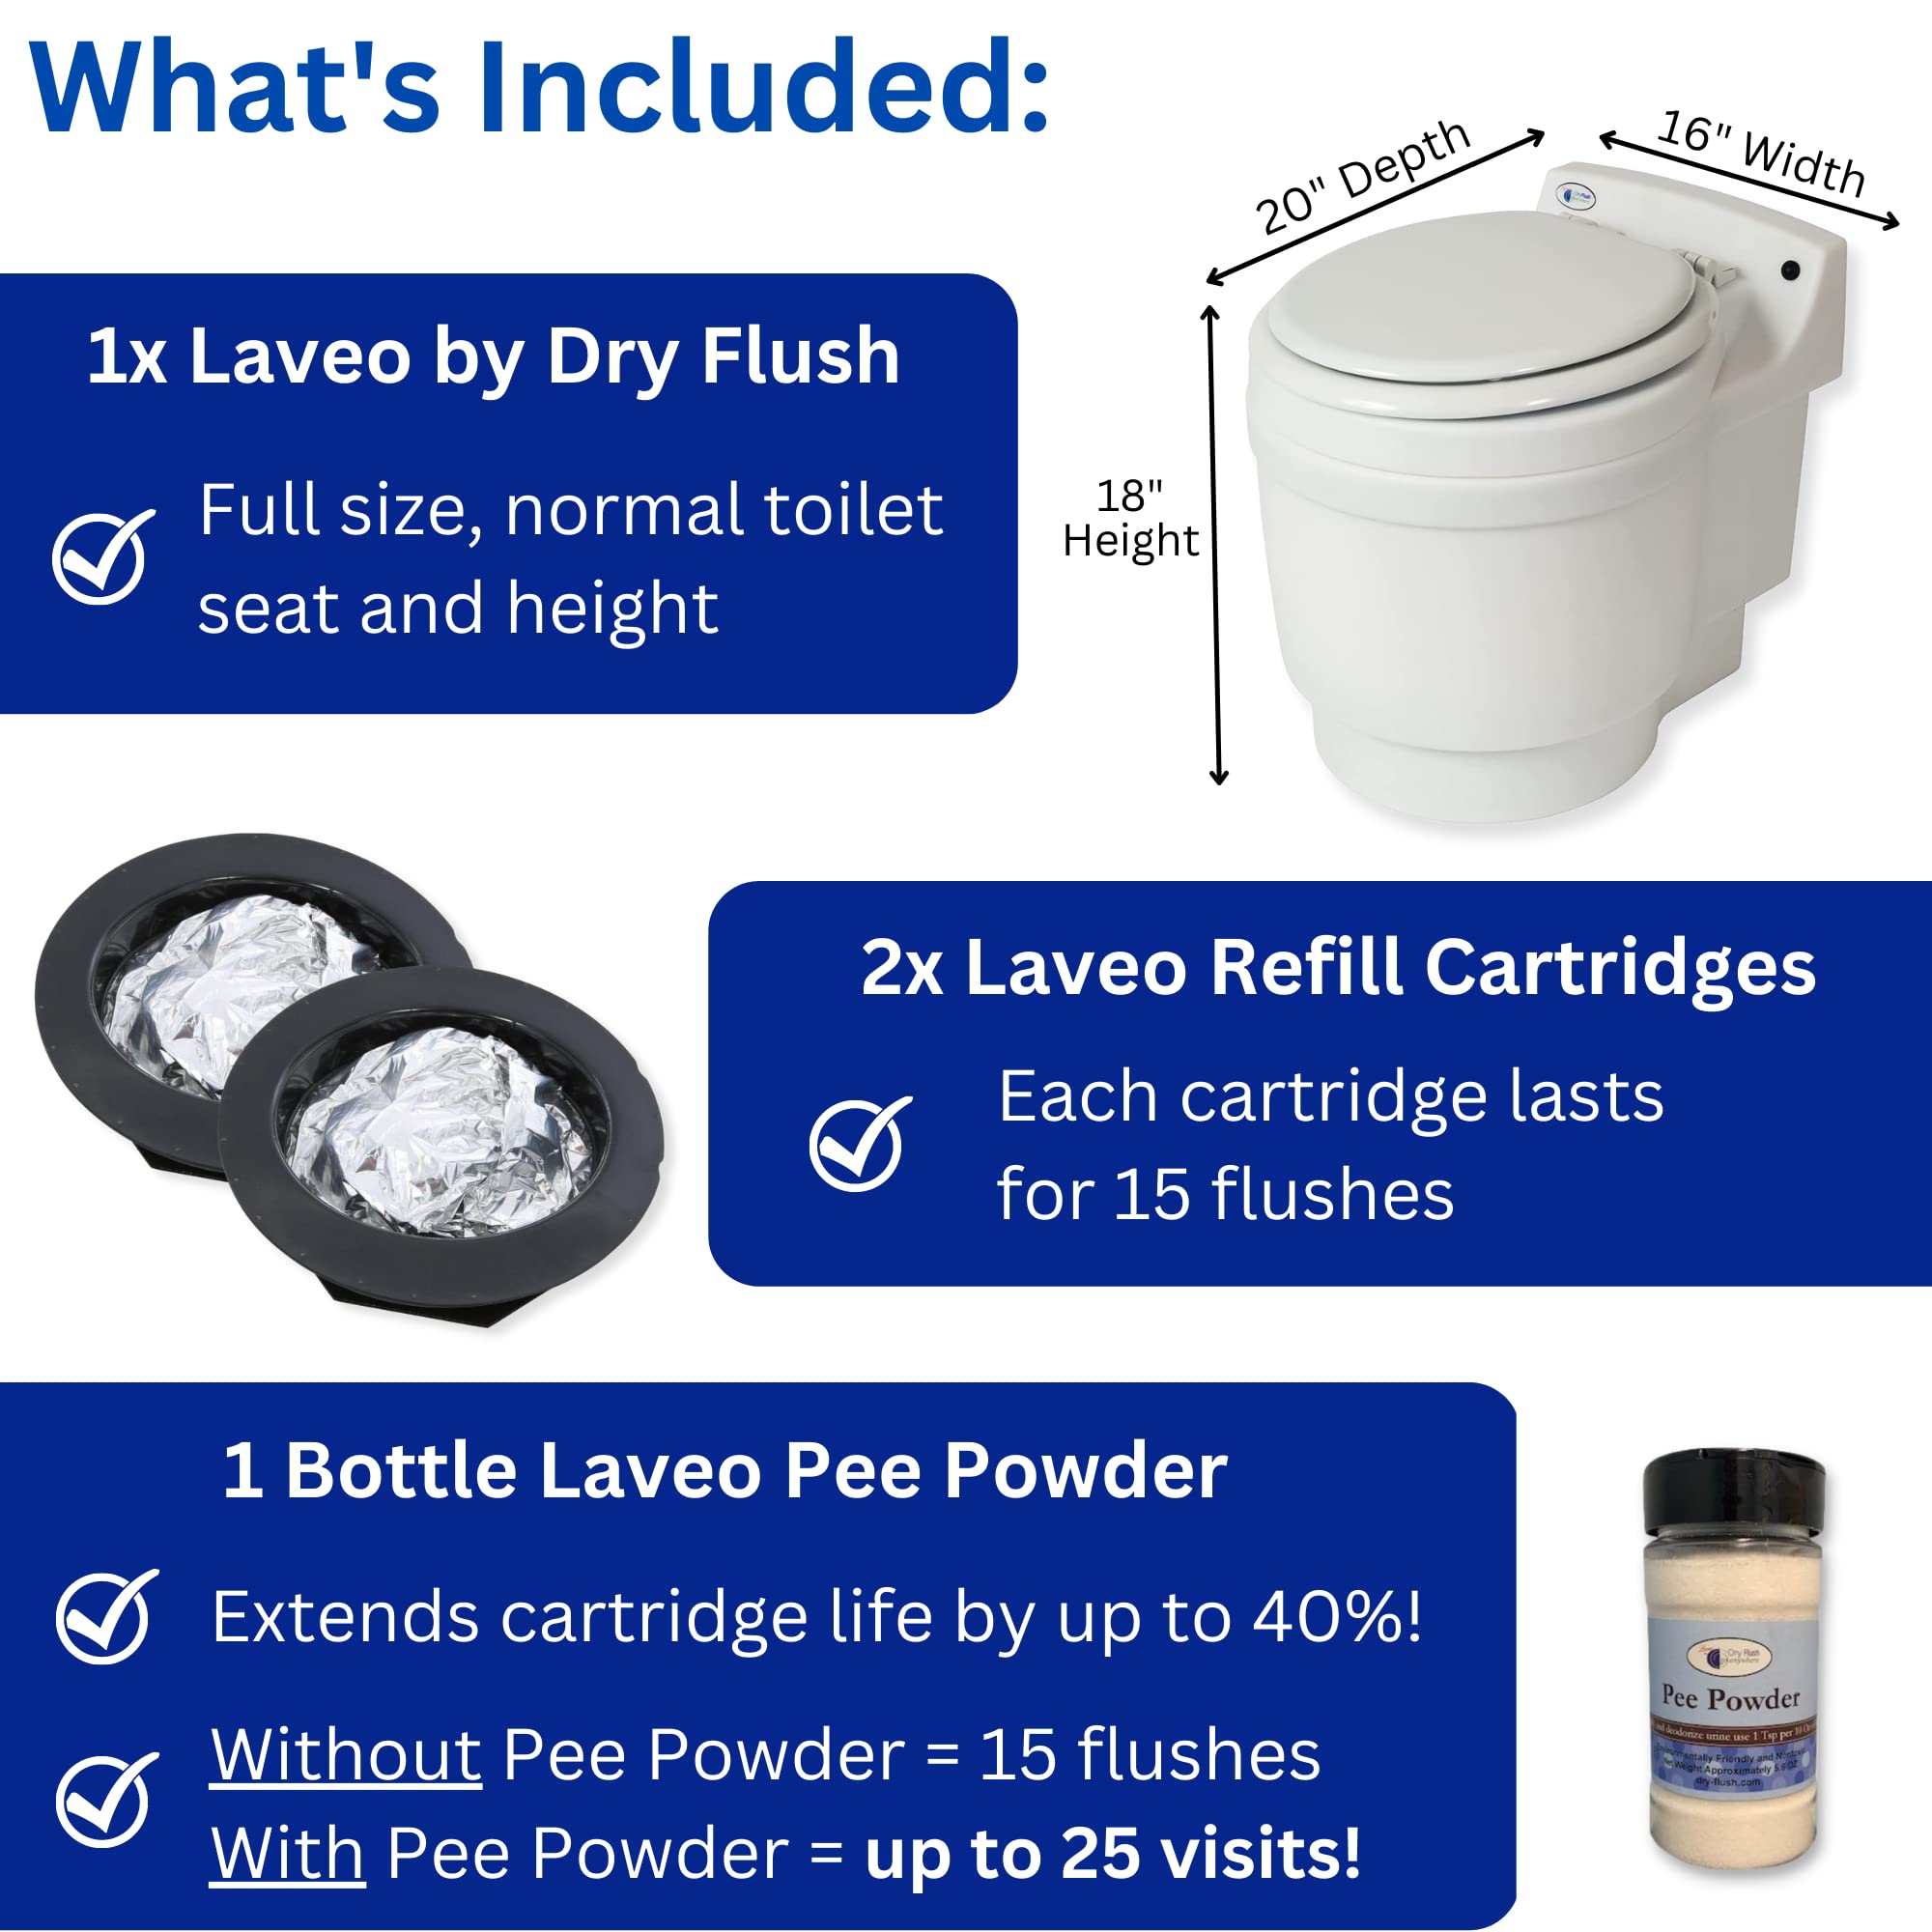 Laveo Dry Flush Toilet - Waterless, Portable, Self Contained and Easier to Use than an Incinerating or Composting Toilet. Great for Tiny Homes, Vans, Boats, Camping, RVs and Off Grid, LDPE, White